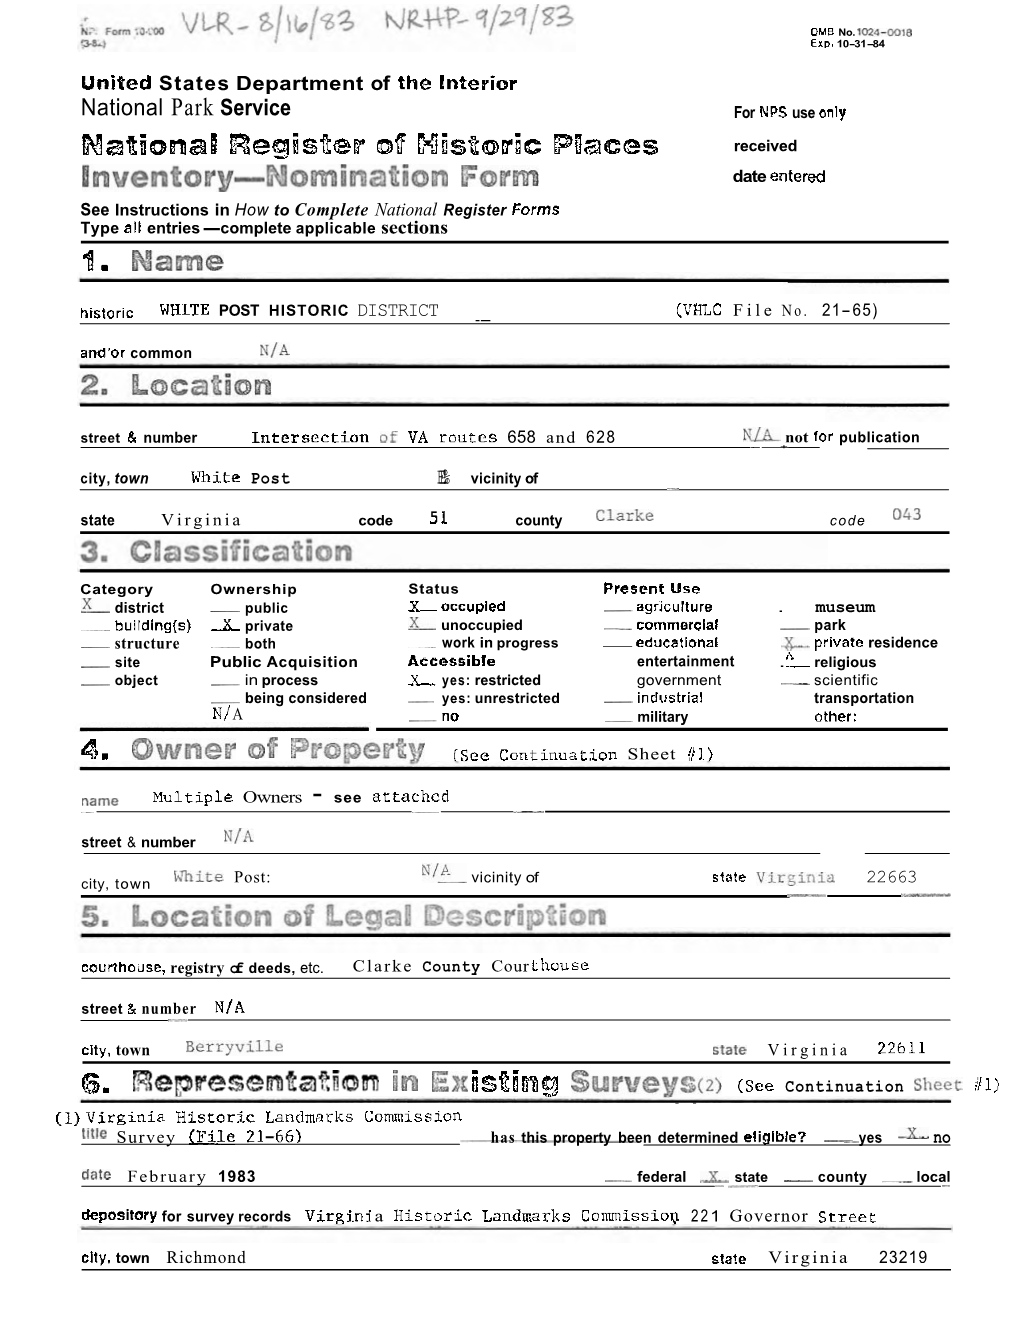 Nomination Form WHITE POST HISTORIC DISTRICT, CLARKE COUNTY, VA Cont~Nuat~Onsheet 112 Item Number 7 Page 1